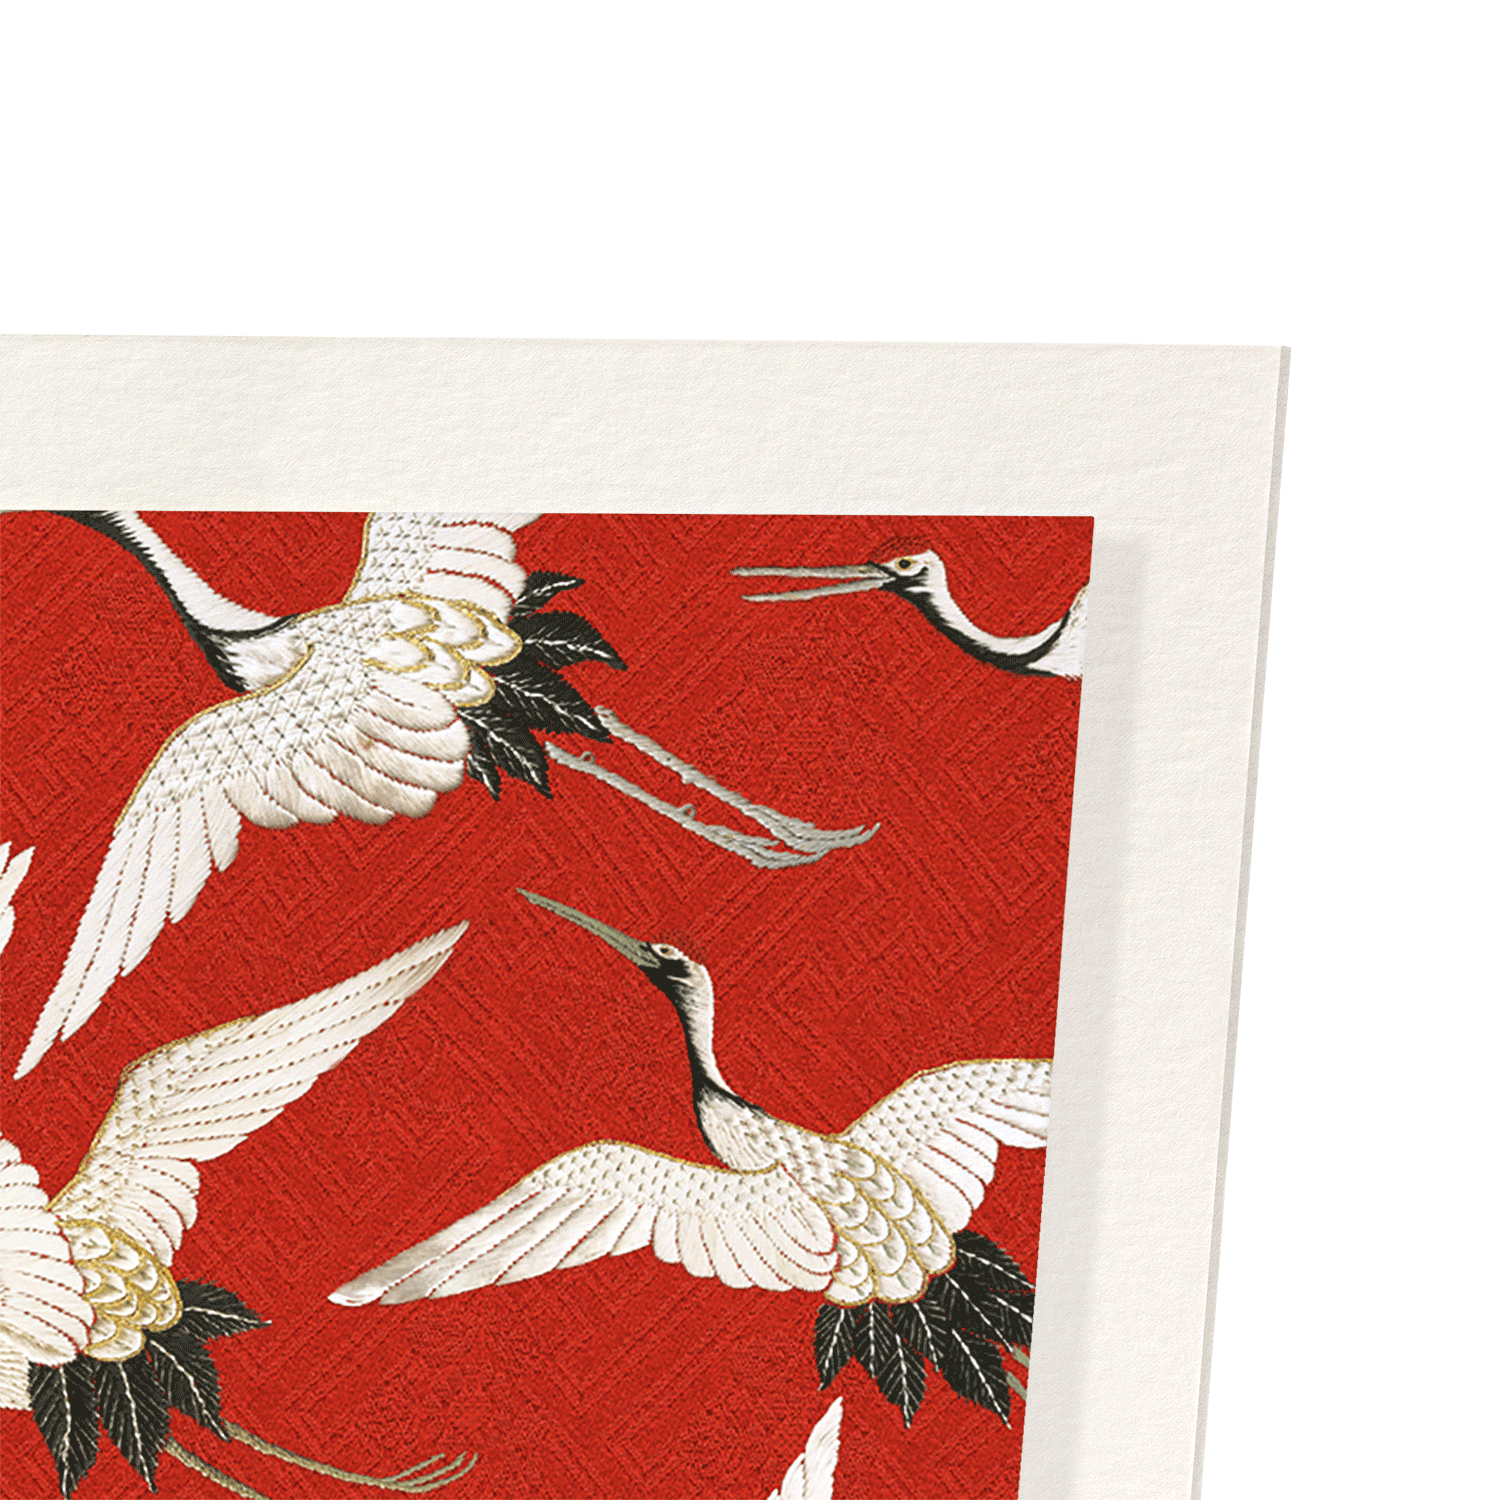 CRANE EMBROIDERY ON RED